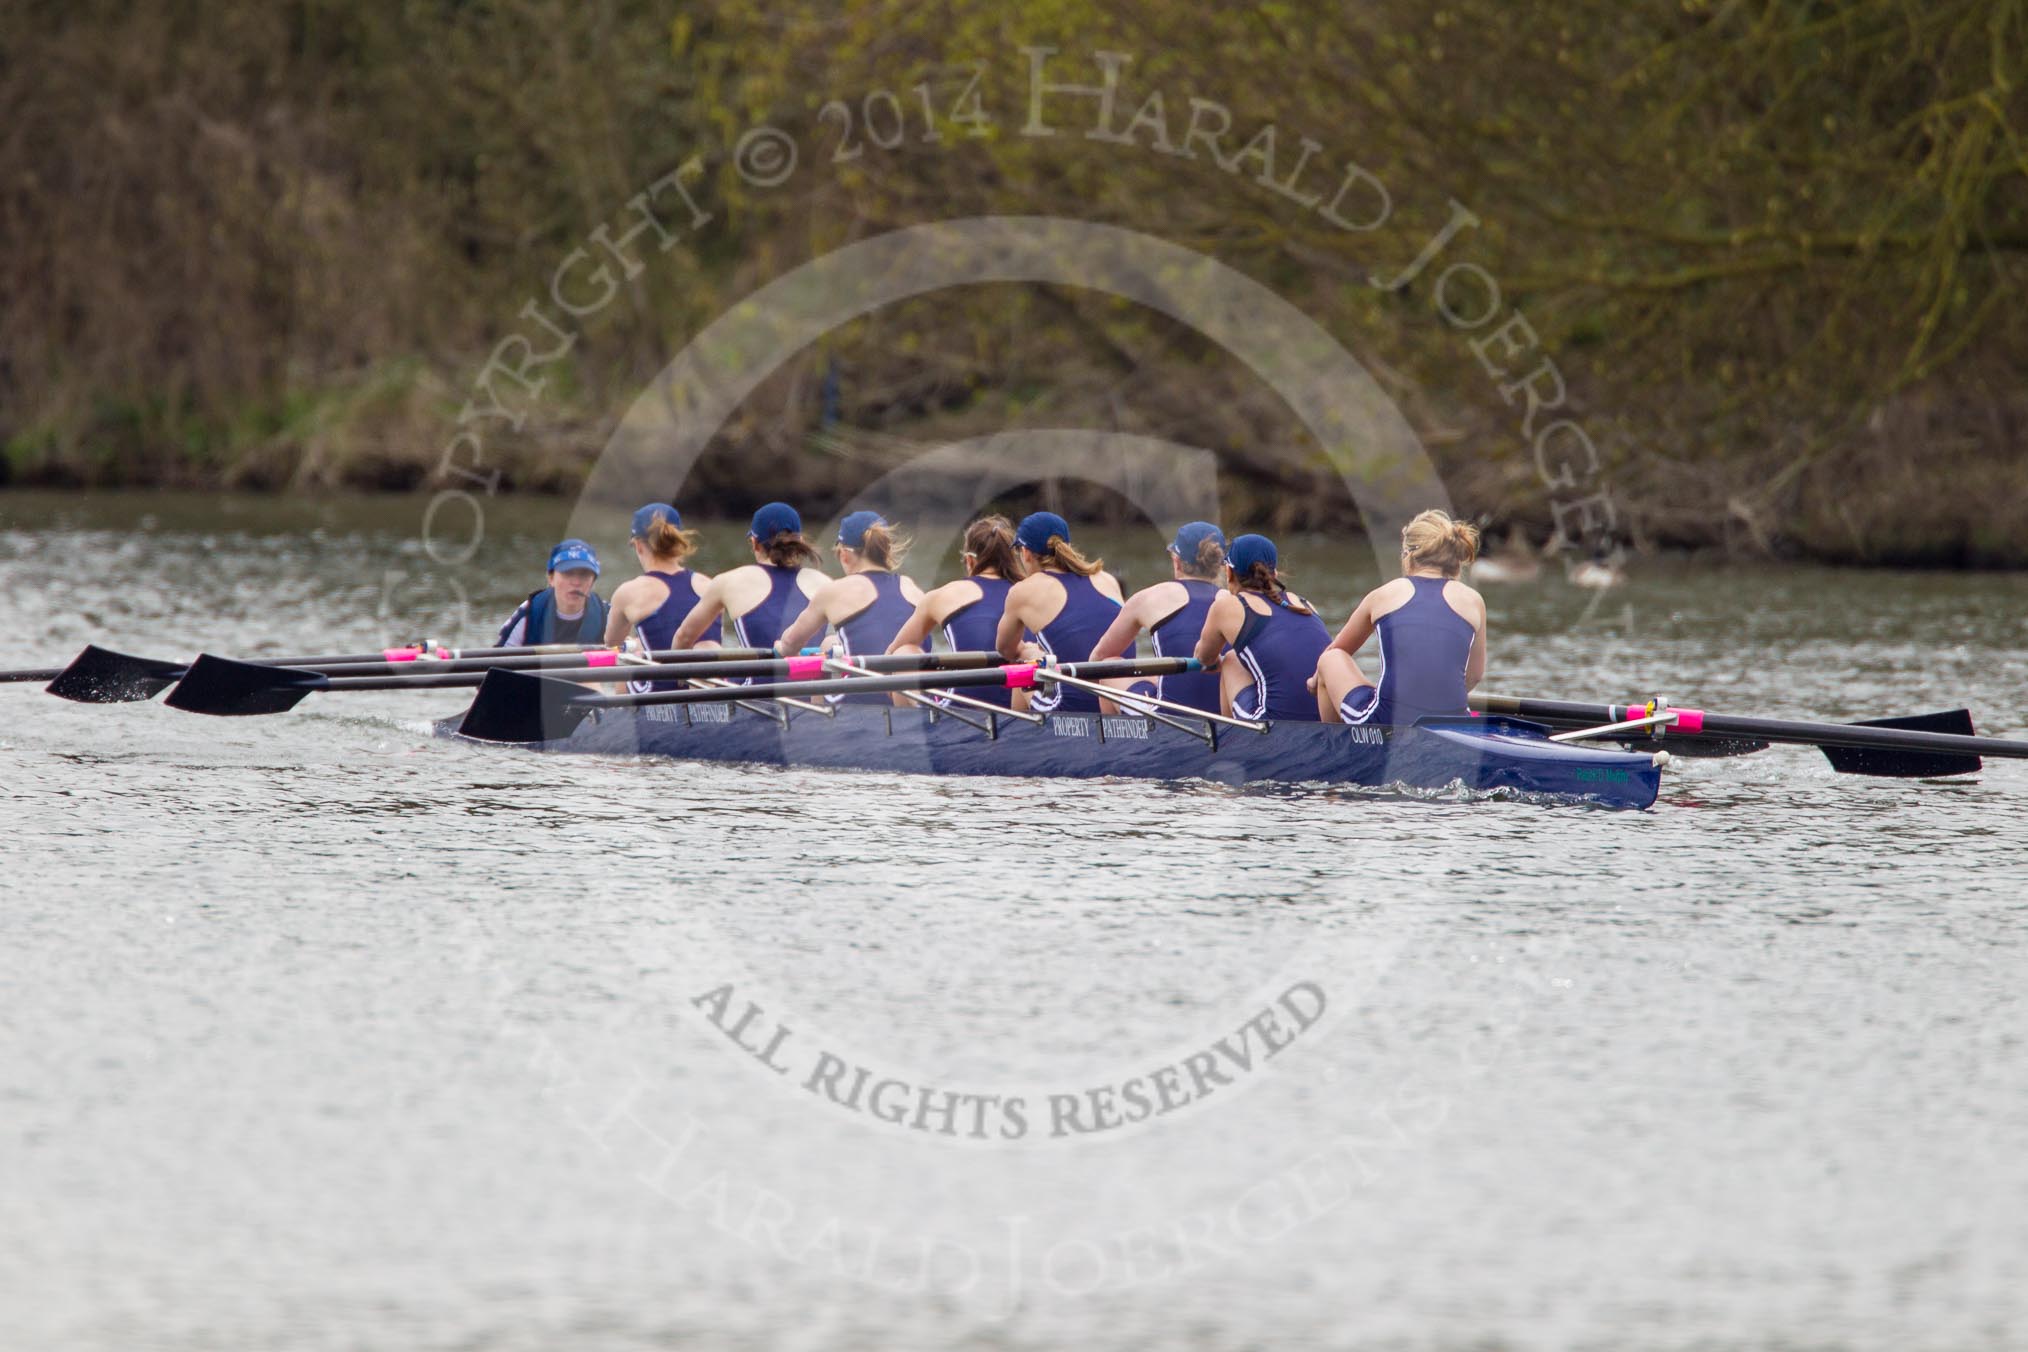 The Women's Boat Race and Henley Boat Races 2014: The Lightweight Women's Boat Race - OUWLRCin the lead: Bow Sophie Tomlinson, 2 Kirstin Rilham, 3 Rebecca Lane, 4 Nicky Huskens, 5 Sophie Philbrick, 6 Zoe Cooper-Sutton, 7 Emma Clifton, stroke  Suzanne Cole, cox  Lea Carrot..
River Thames,
Henley-on-Thames,
Buckinghamshire,
United Kingdom,
on 30 March 2014 at 14:48, image #223